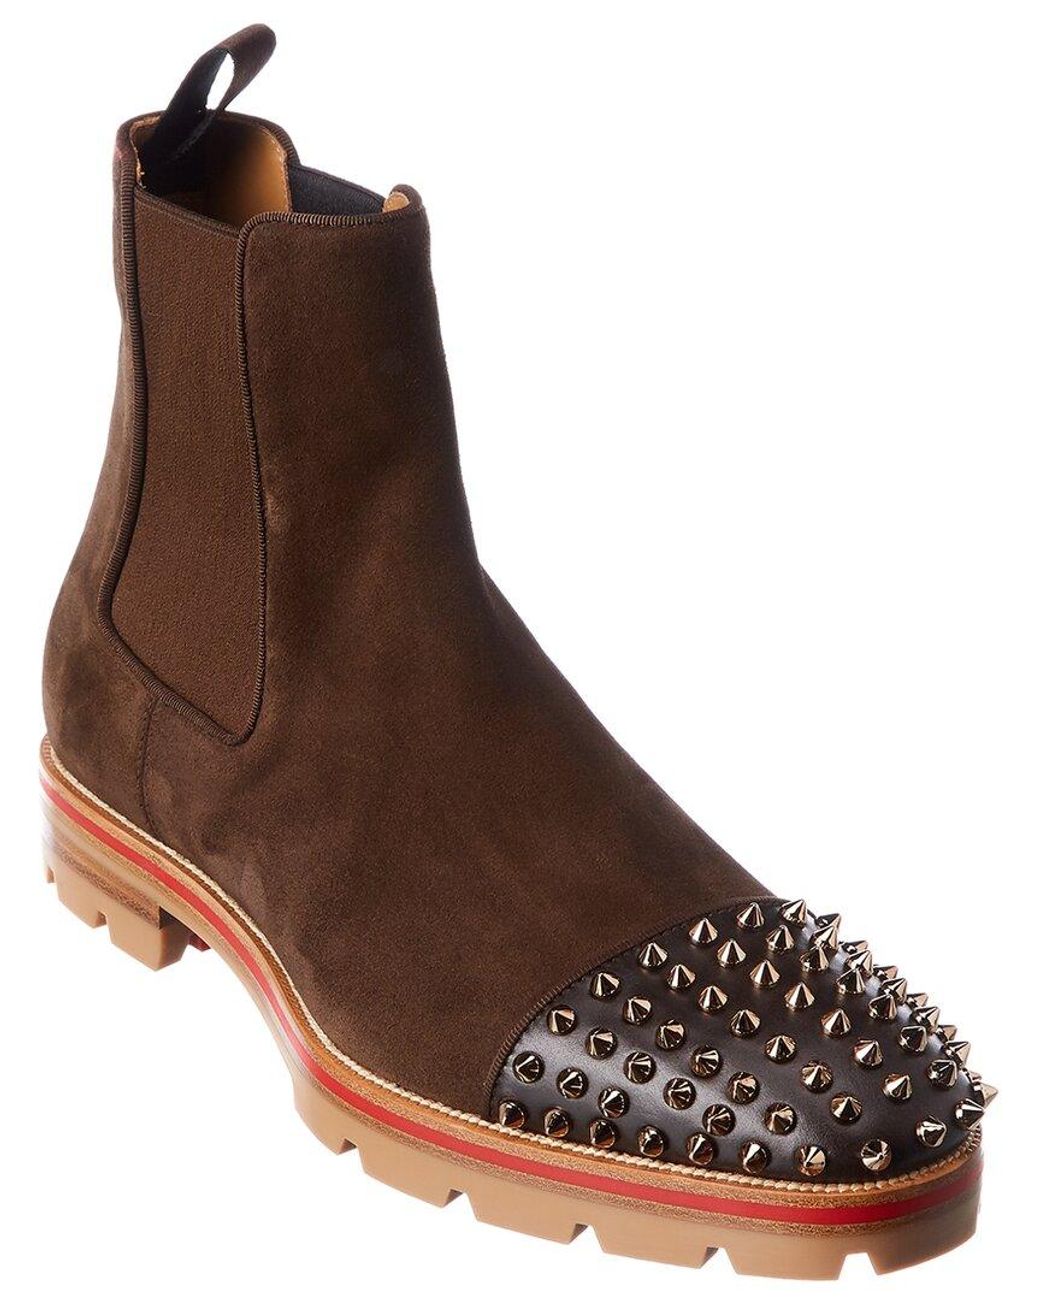 Christian Louboutin Melon Spikes Suede Boot in Brown for Men - Lyst